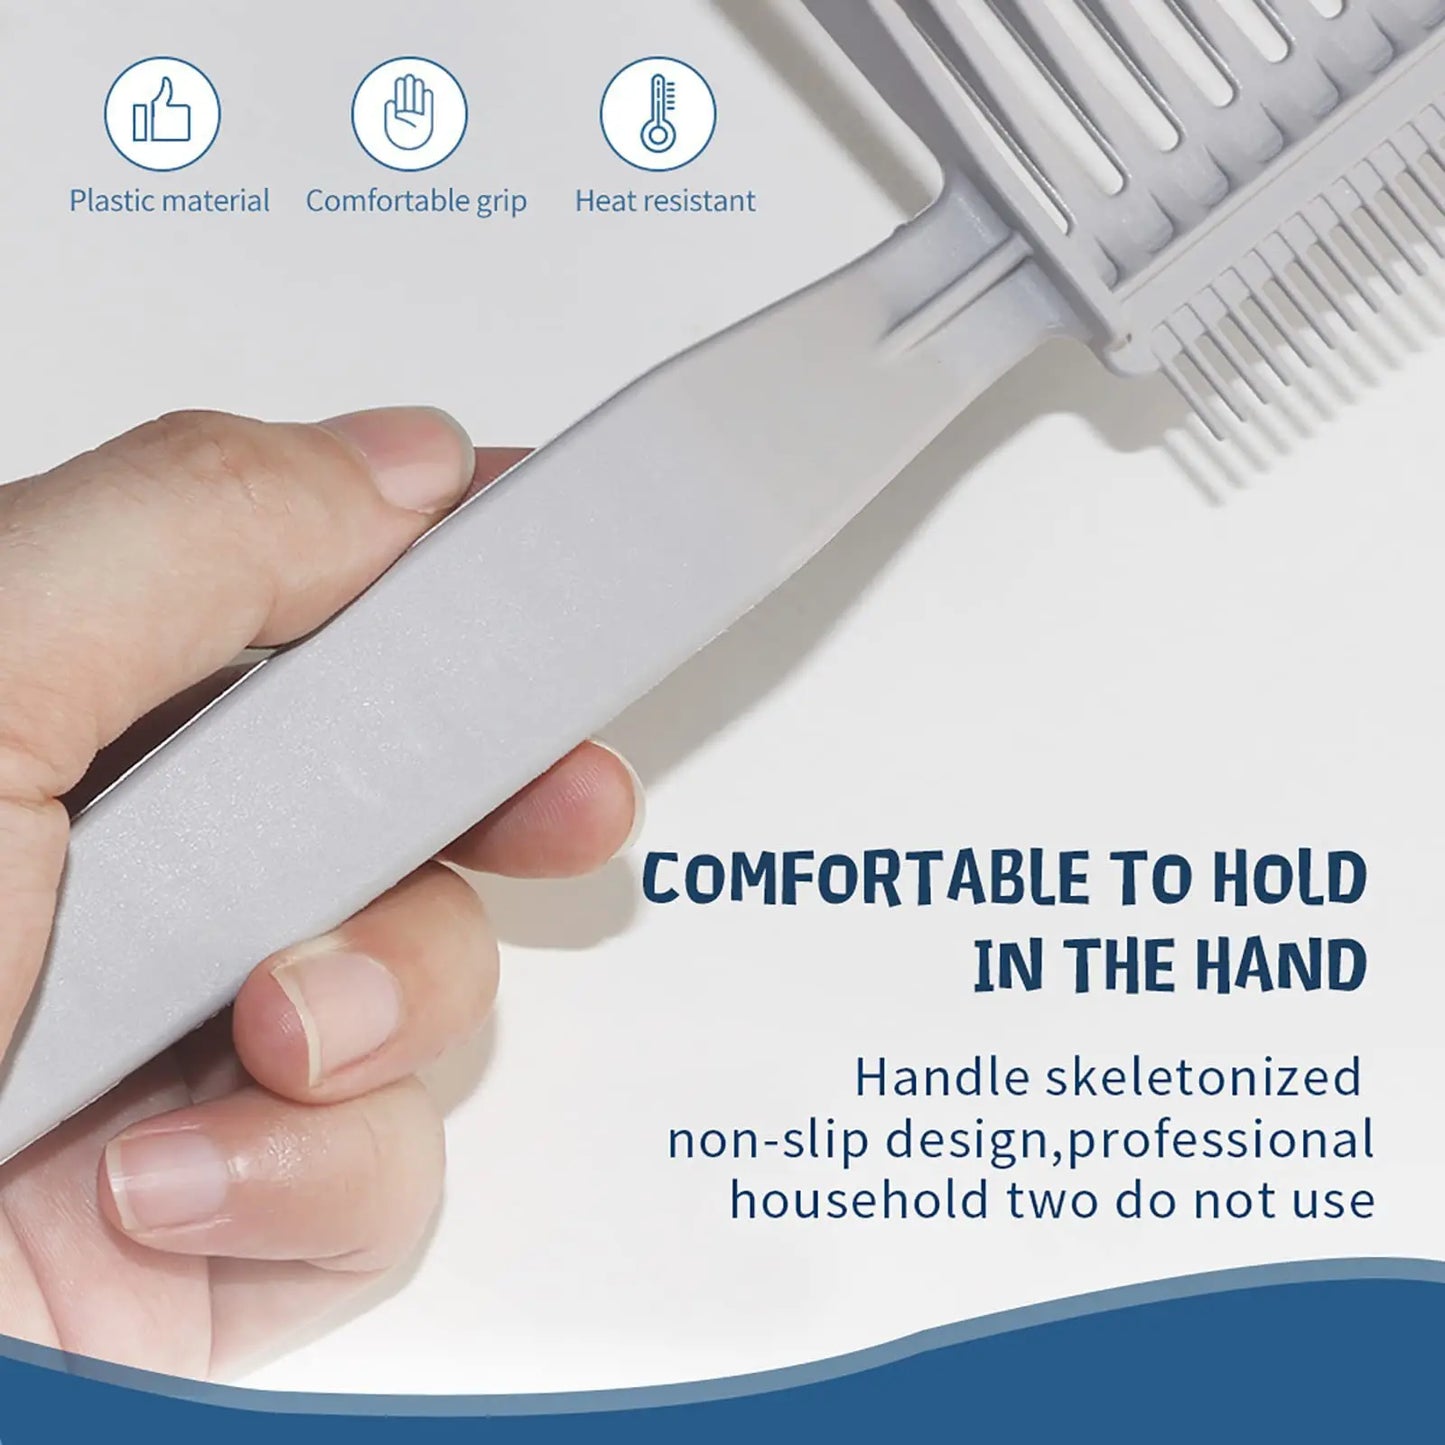 Barber Fade Combs Hair Cutting Resistant Positioning Comb